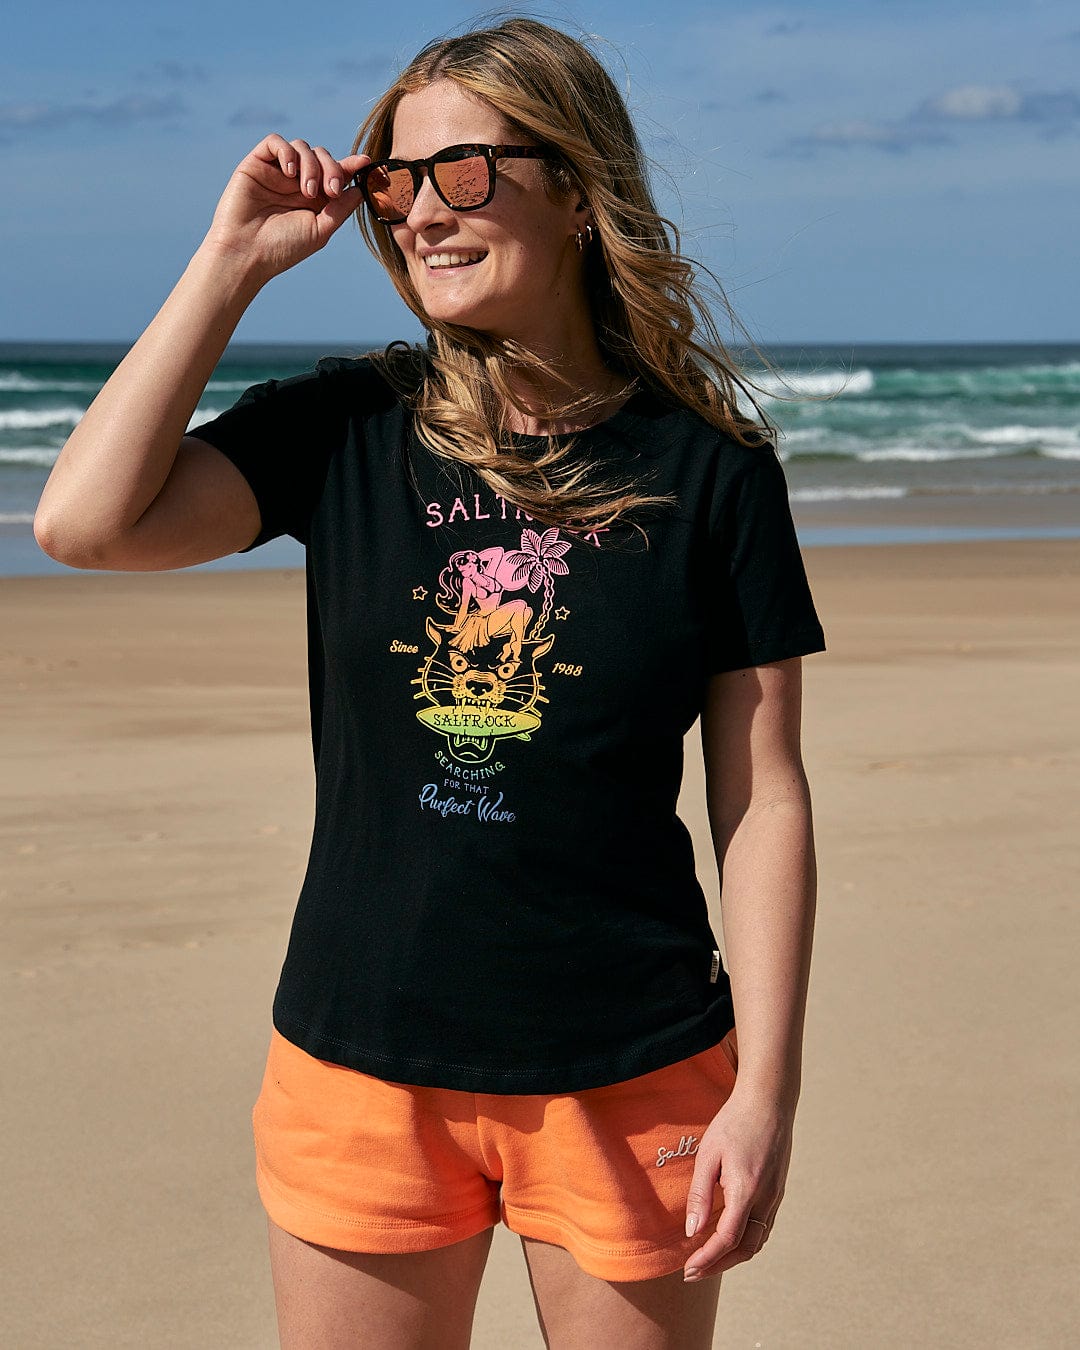 A woman wearing a Saltrock Purfect Wave Gradient - Womens Short Sleeve T-Shirt - Black and orange shorts standing on the beach.